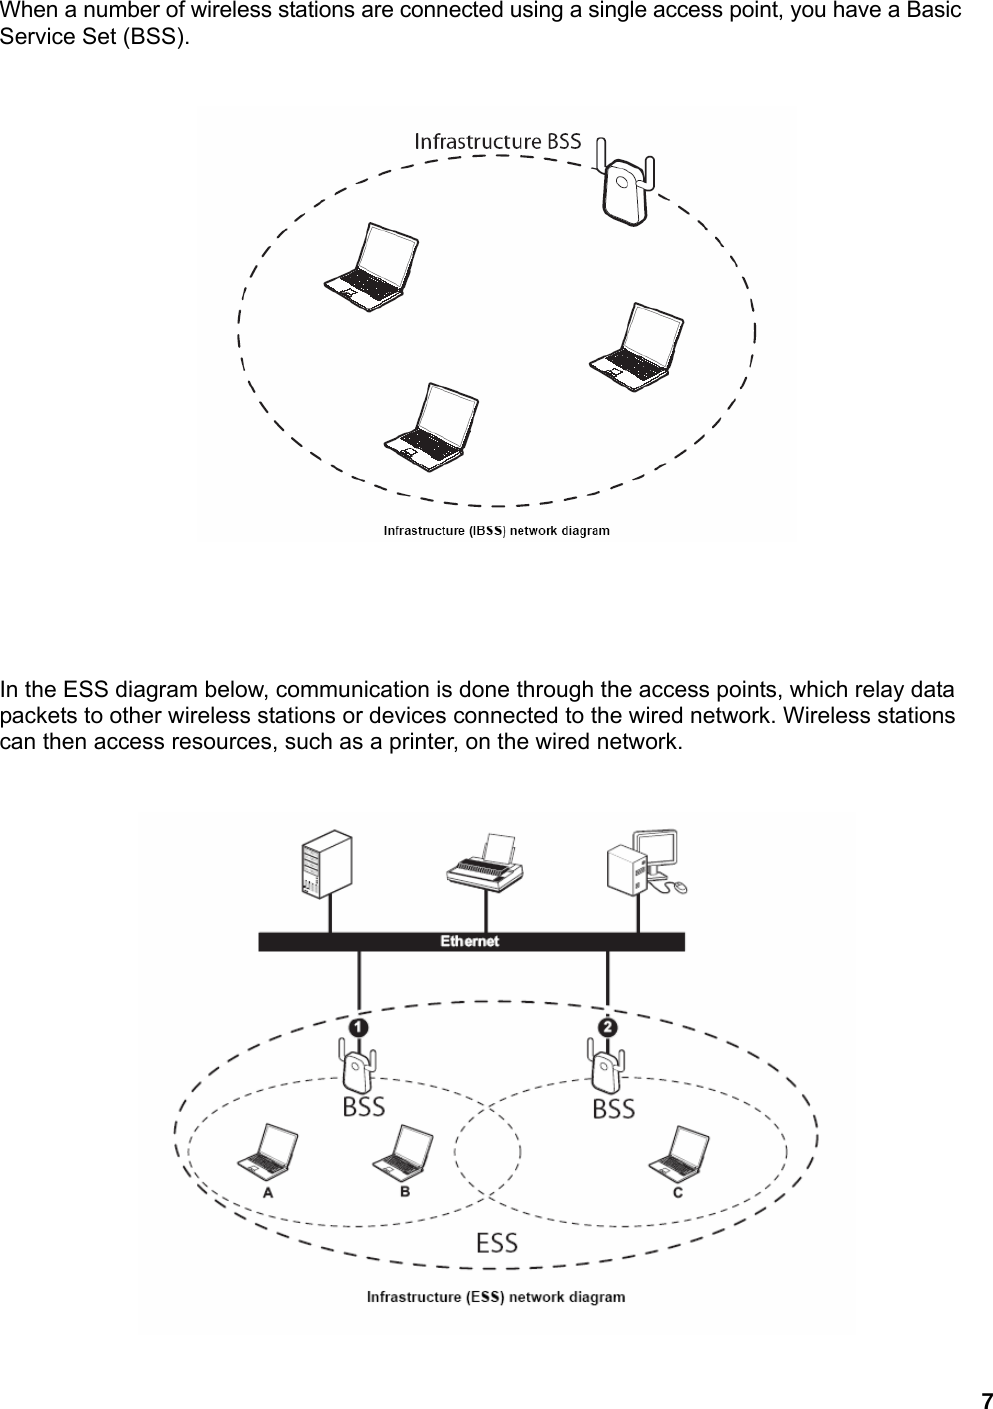 7  When a number of wireless stations are connected using a single access point, you have a Basic Service Set (BSS).         In the ESS diagram below, communication is done through the access points, which relay data packets to other wireless stations or devices connected to the wired network. Wireless stations can then access resources, such as a printer, on the wired network.     